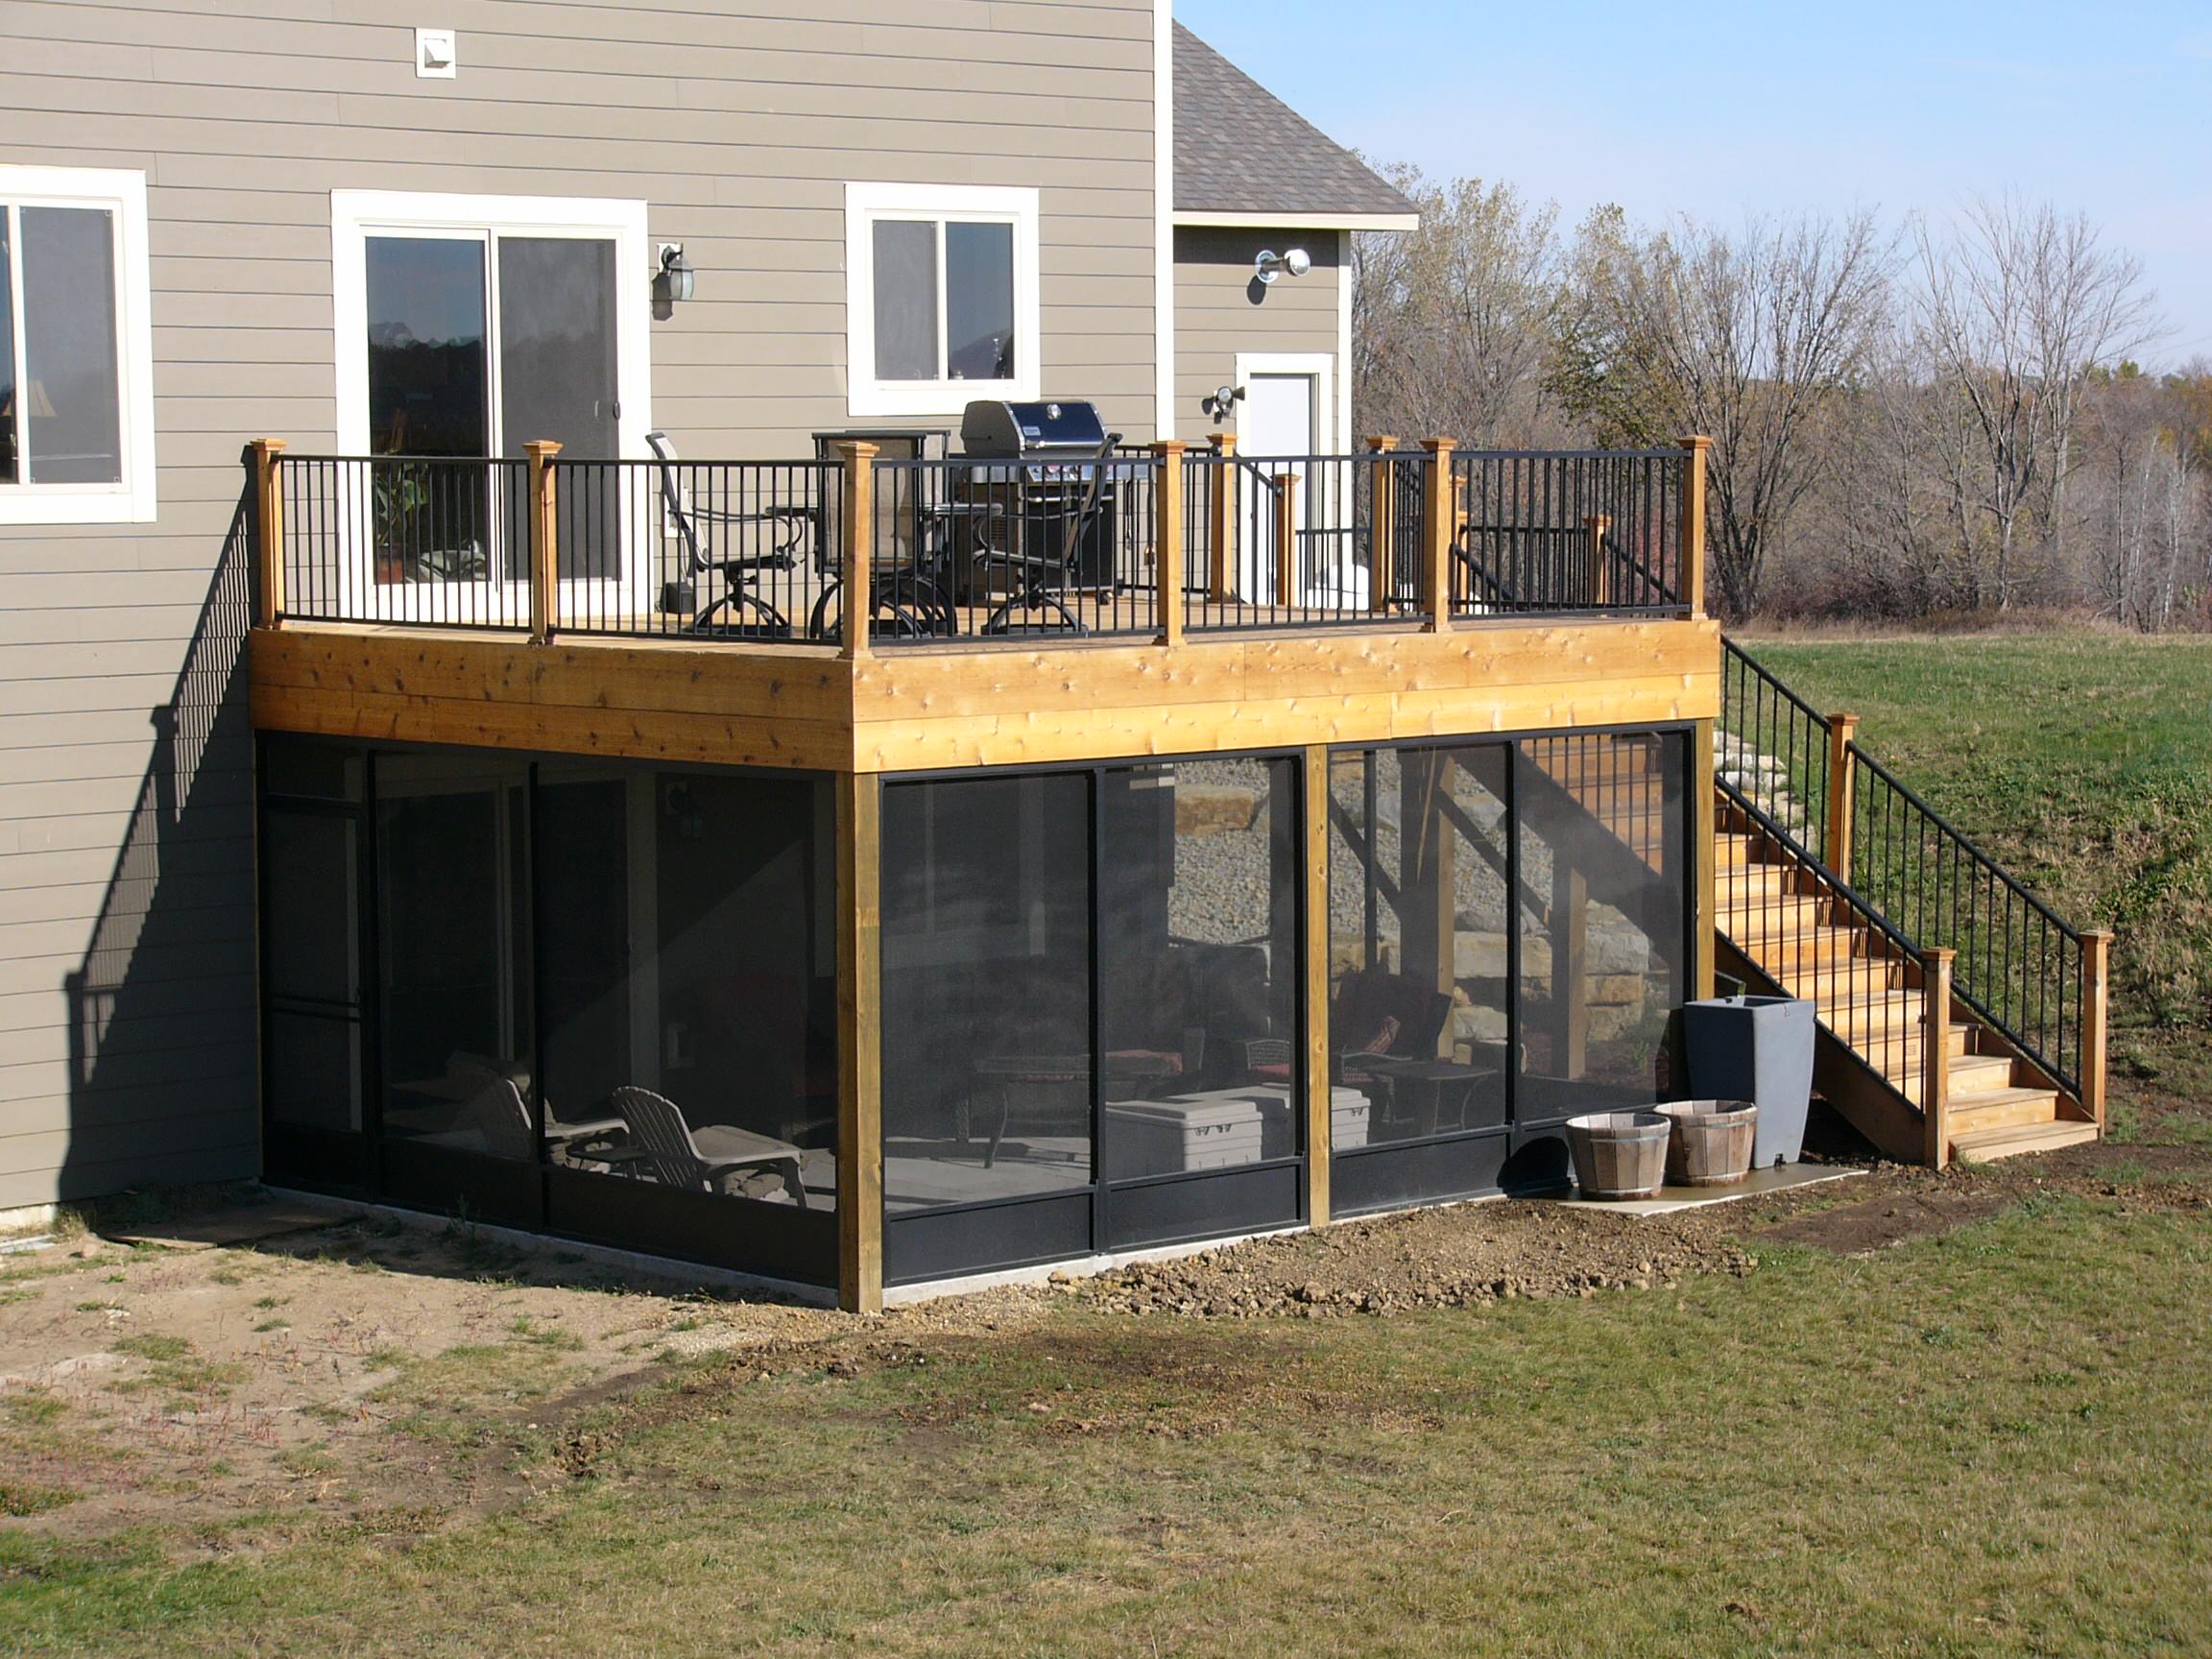 Screened Porch Under Deck Houzz, How To Screen In Patio Under Deck